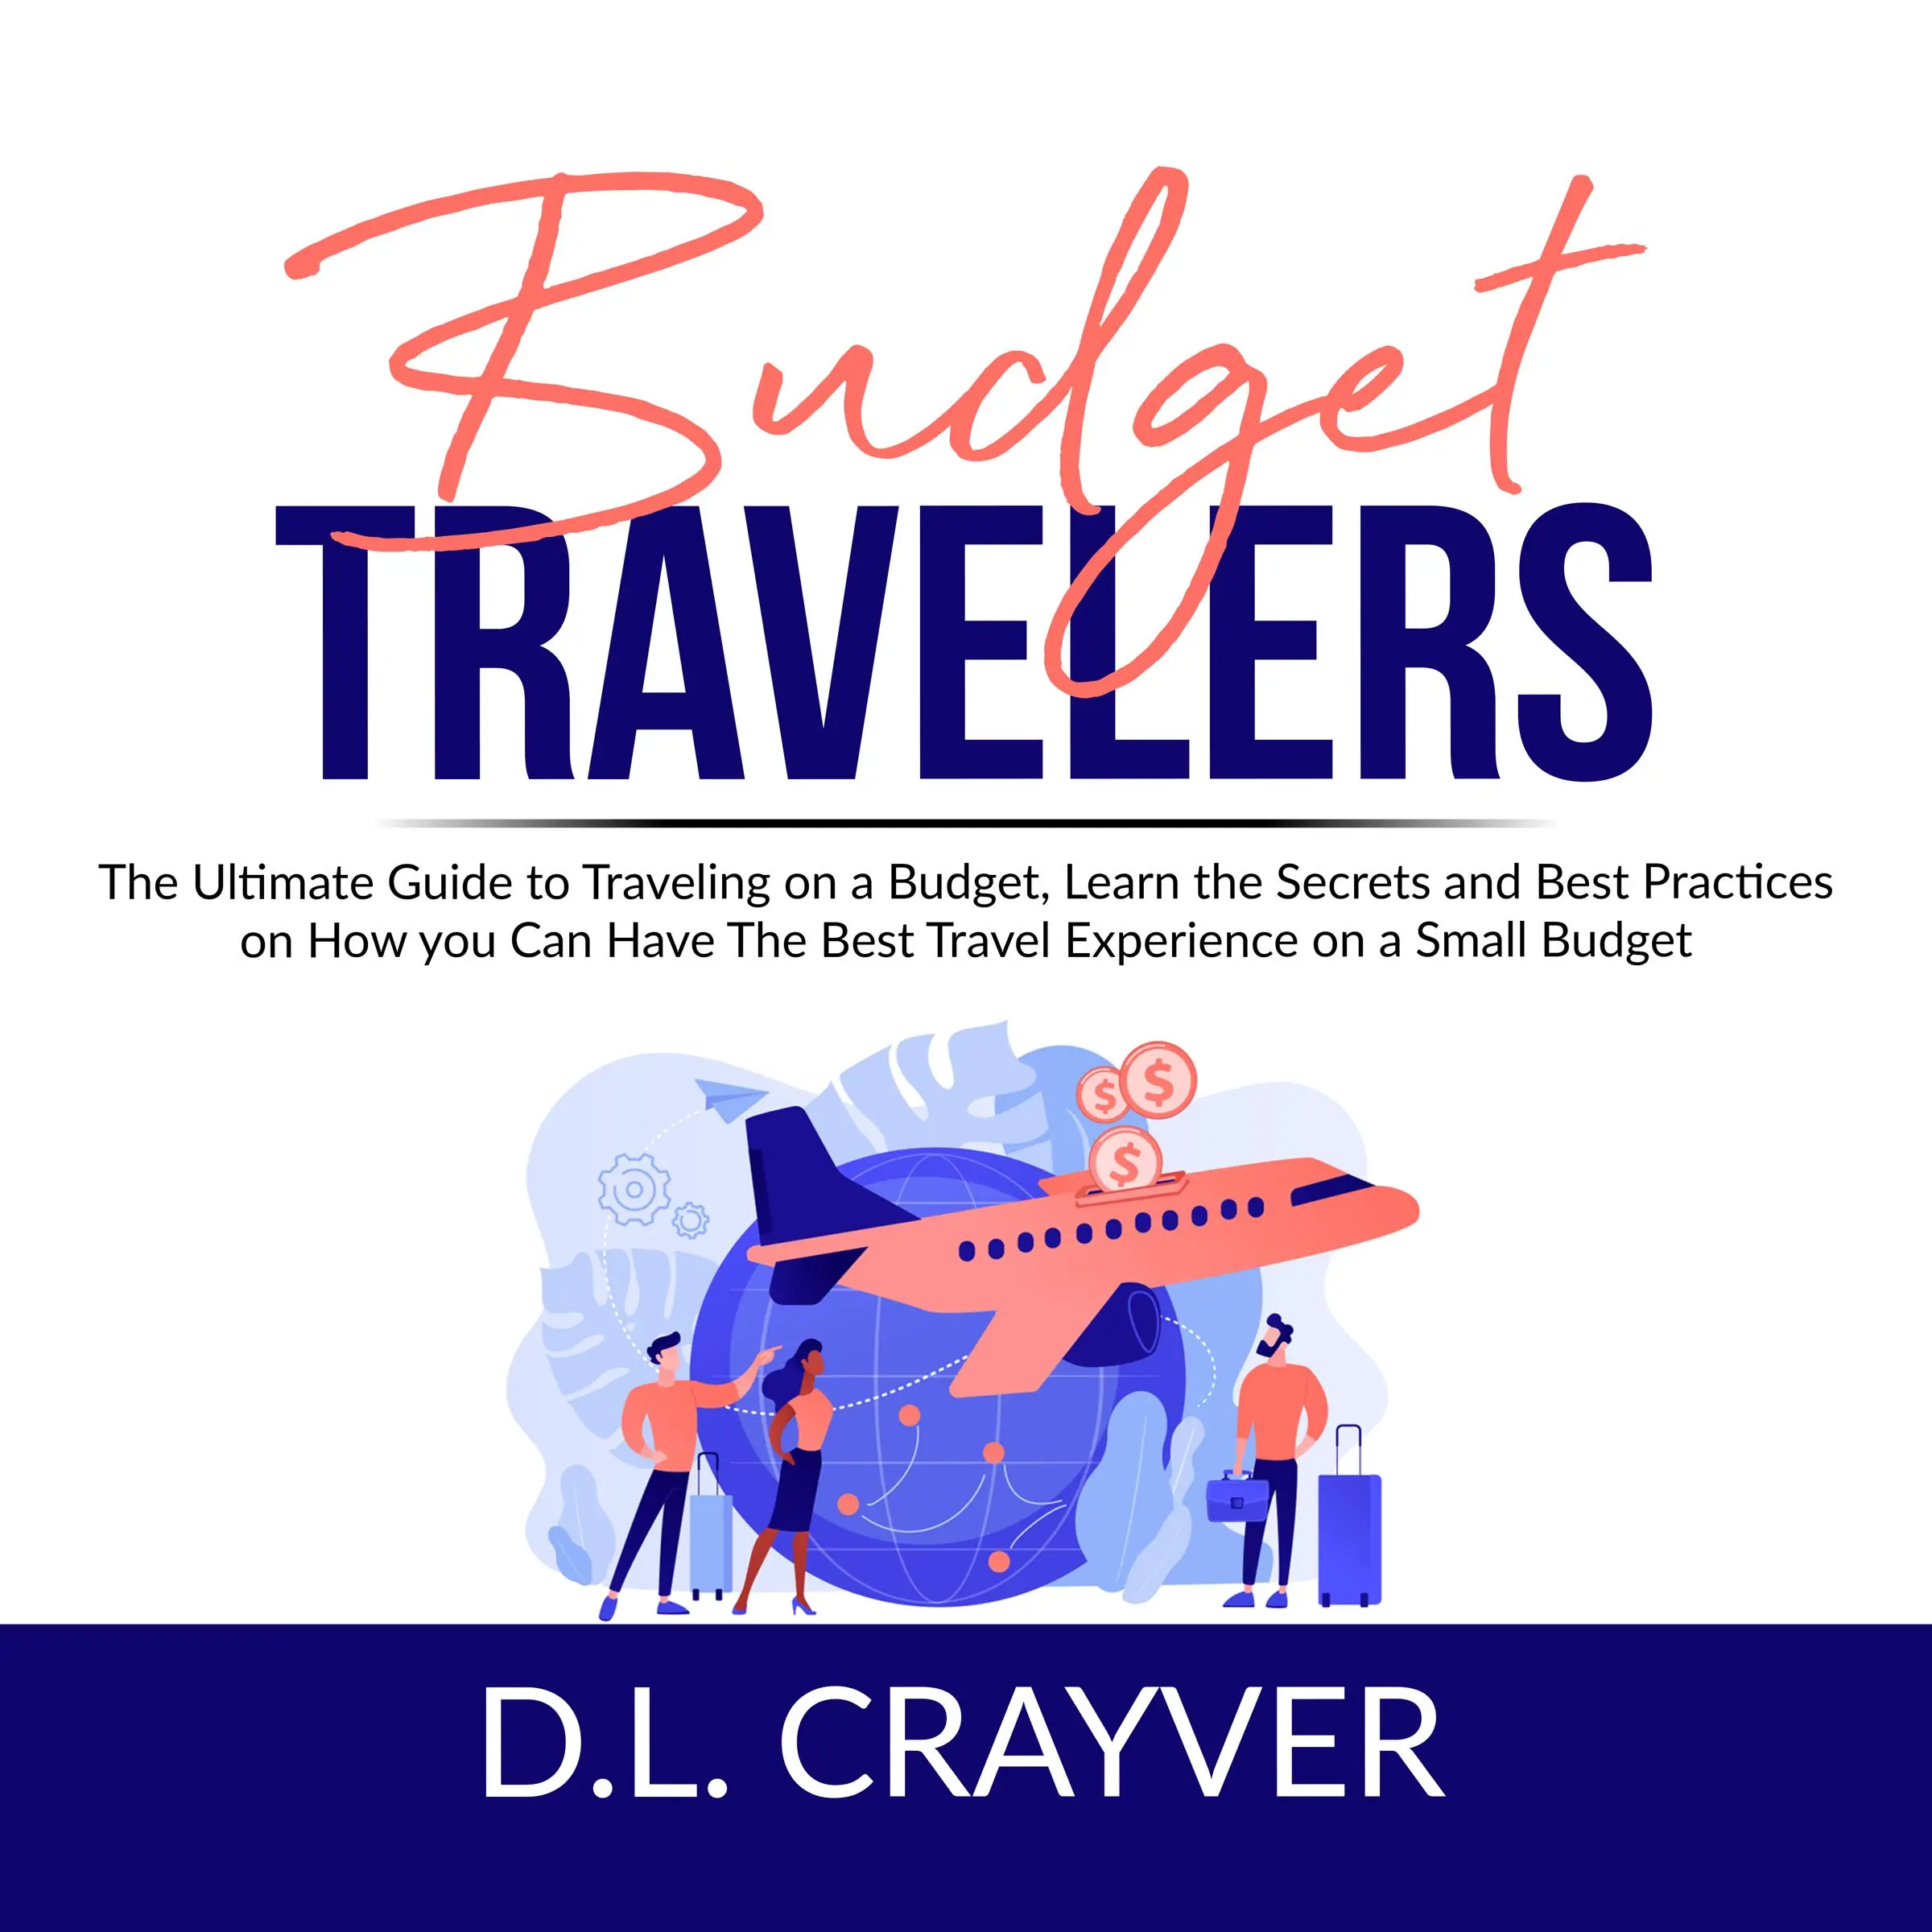 Budget Travelers: The Ultimate Guide to Traveling on a Budget, Learn the Secrets and Best Practices on How you Can Have The Best Travel Experience on a Small Budget by D.L. Crayver Audiobook